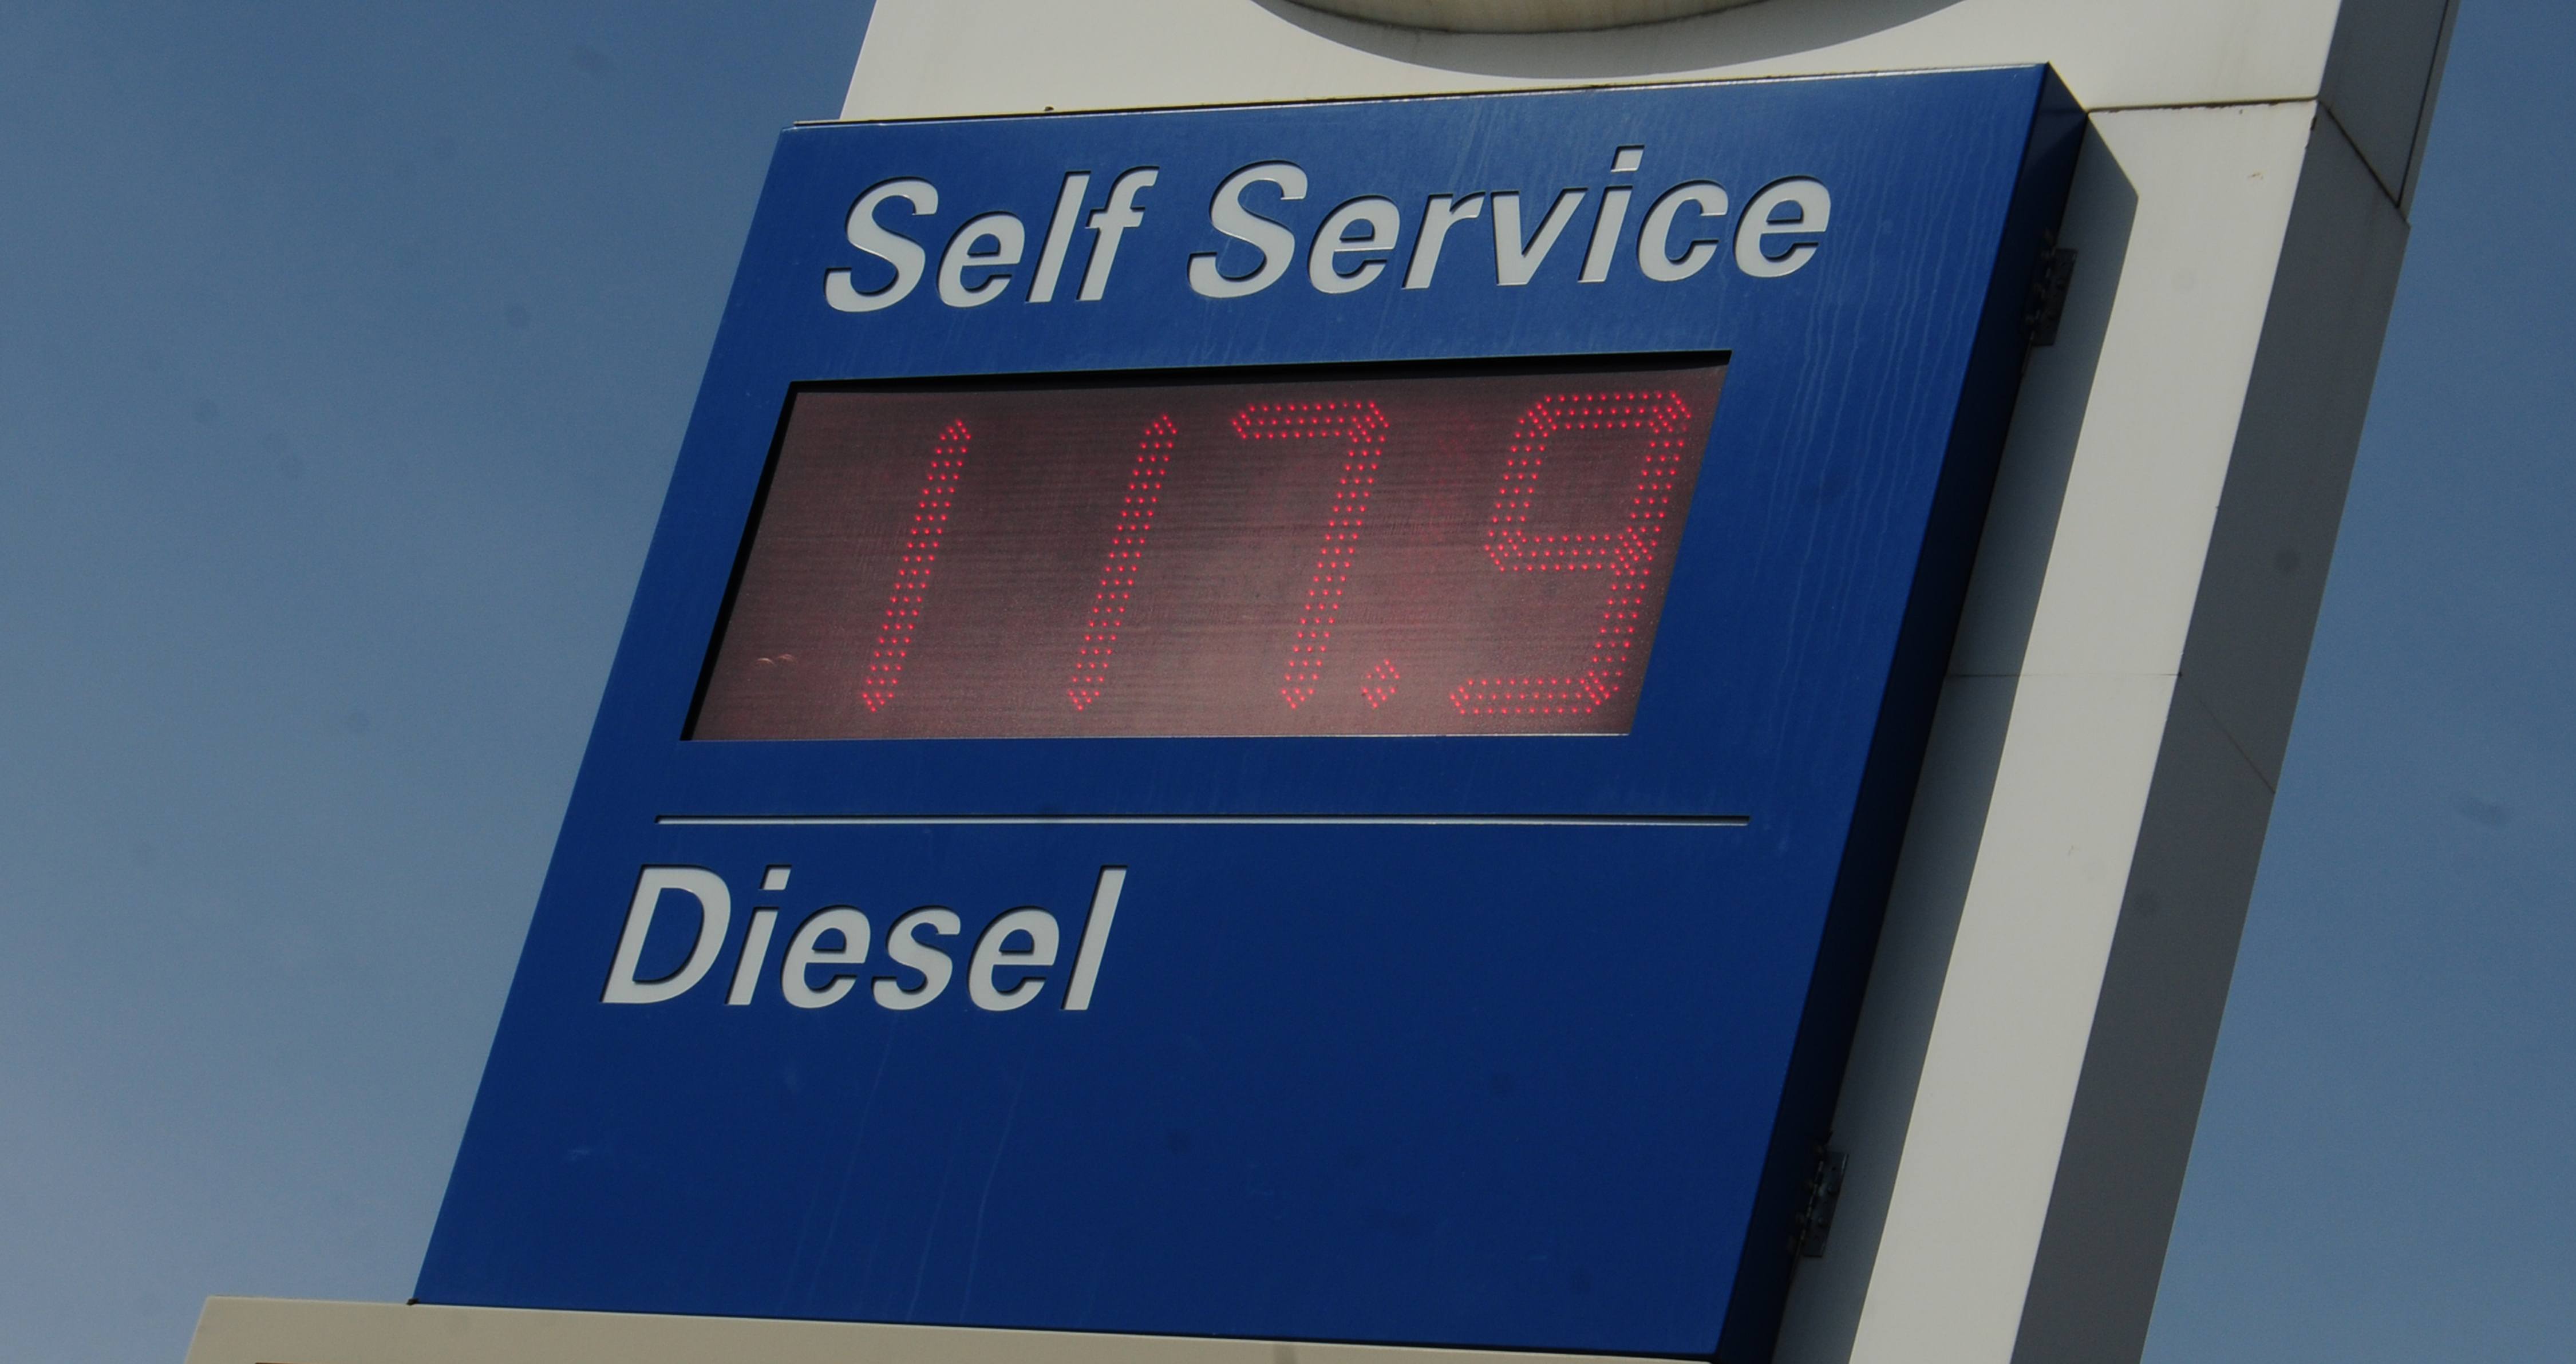 HIGHER- Gas prices continue to stay at the $1.17 mark despite the groans of Red Deerians who depend on it everyday.